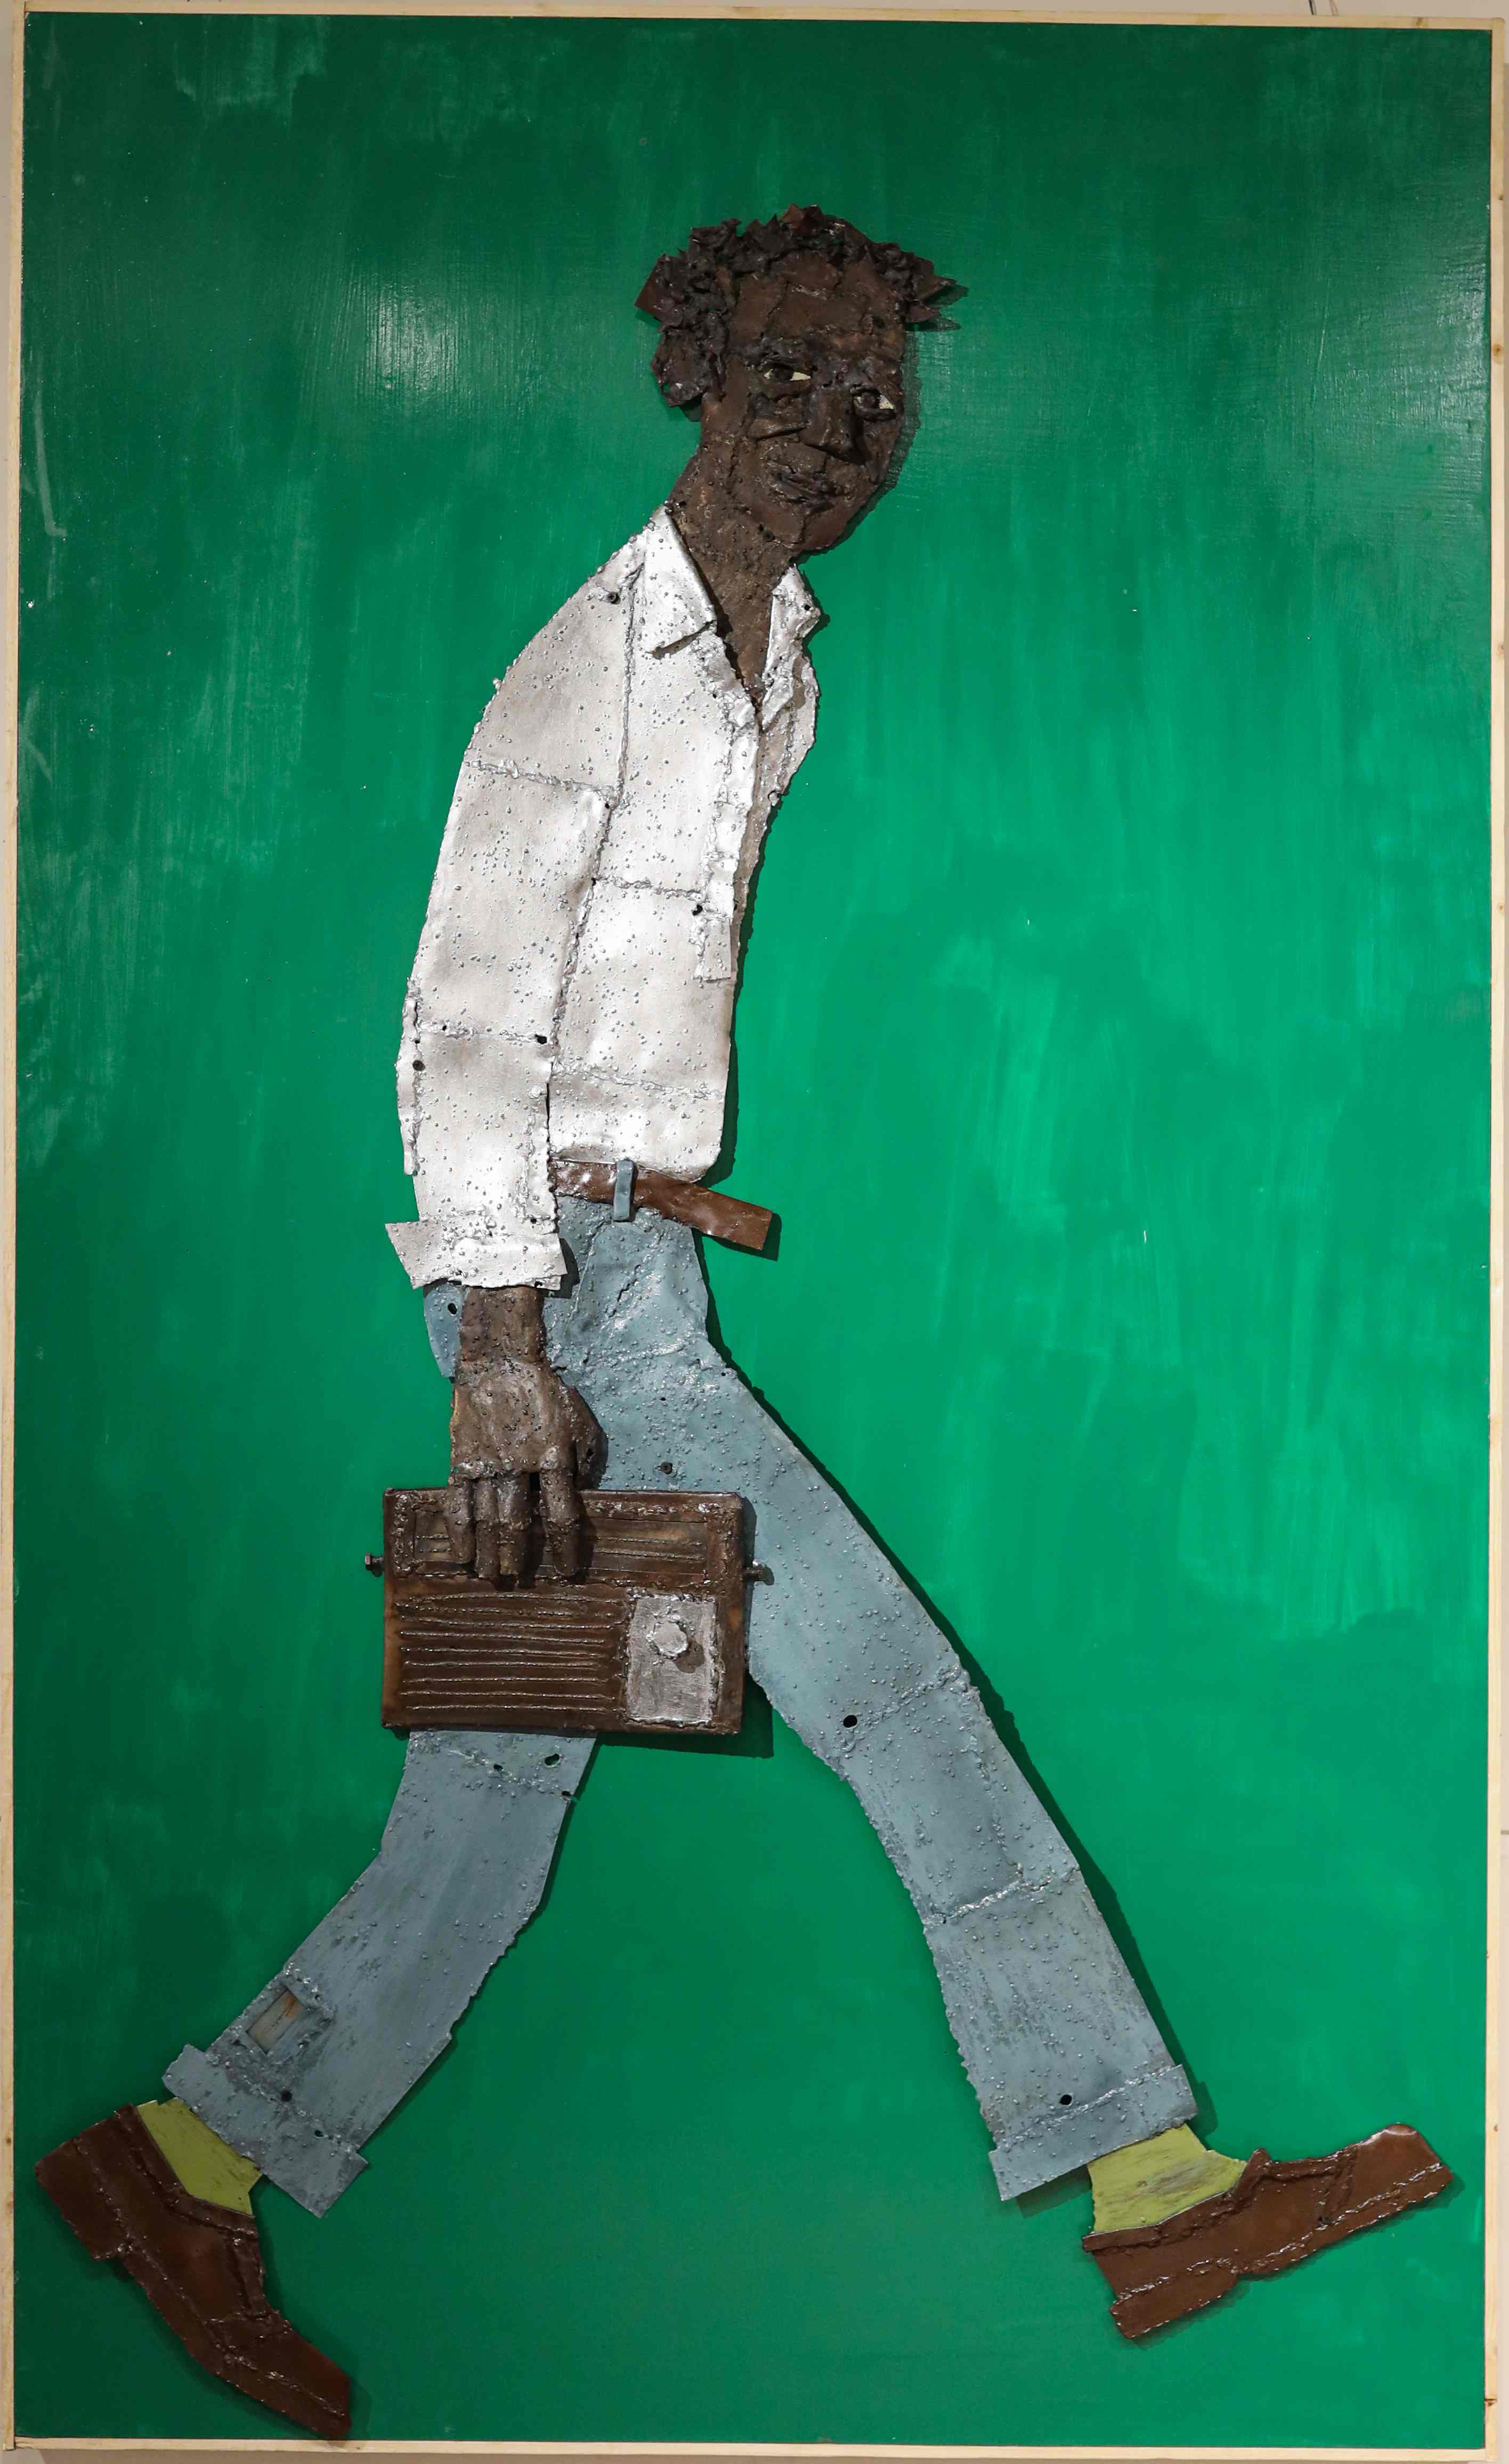 Title: Man with Radio<br>Medium: Metal on Board<br>Size in inches: 72x48